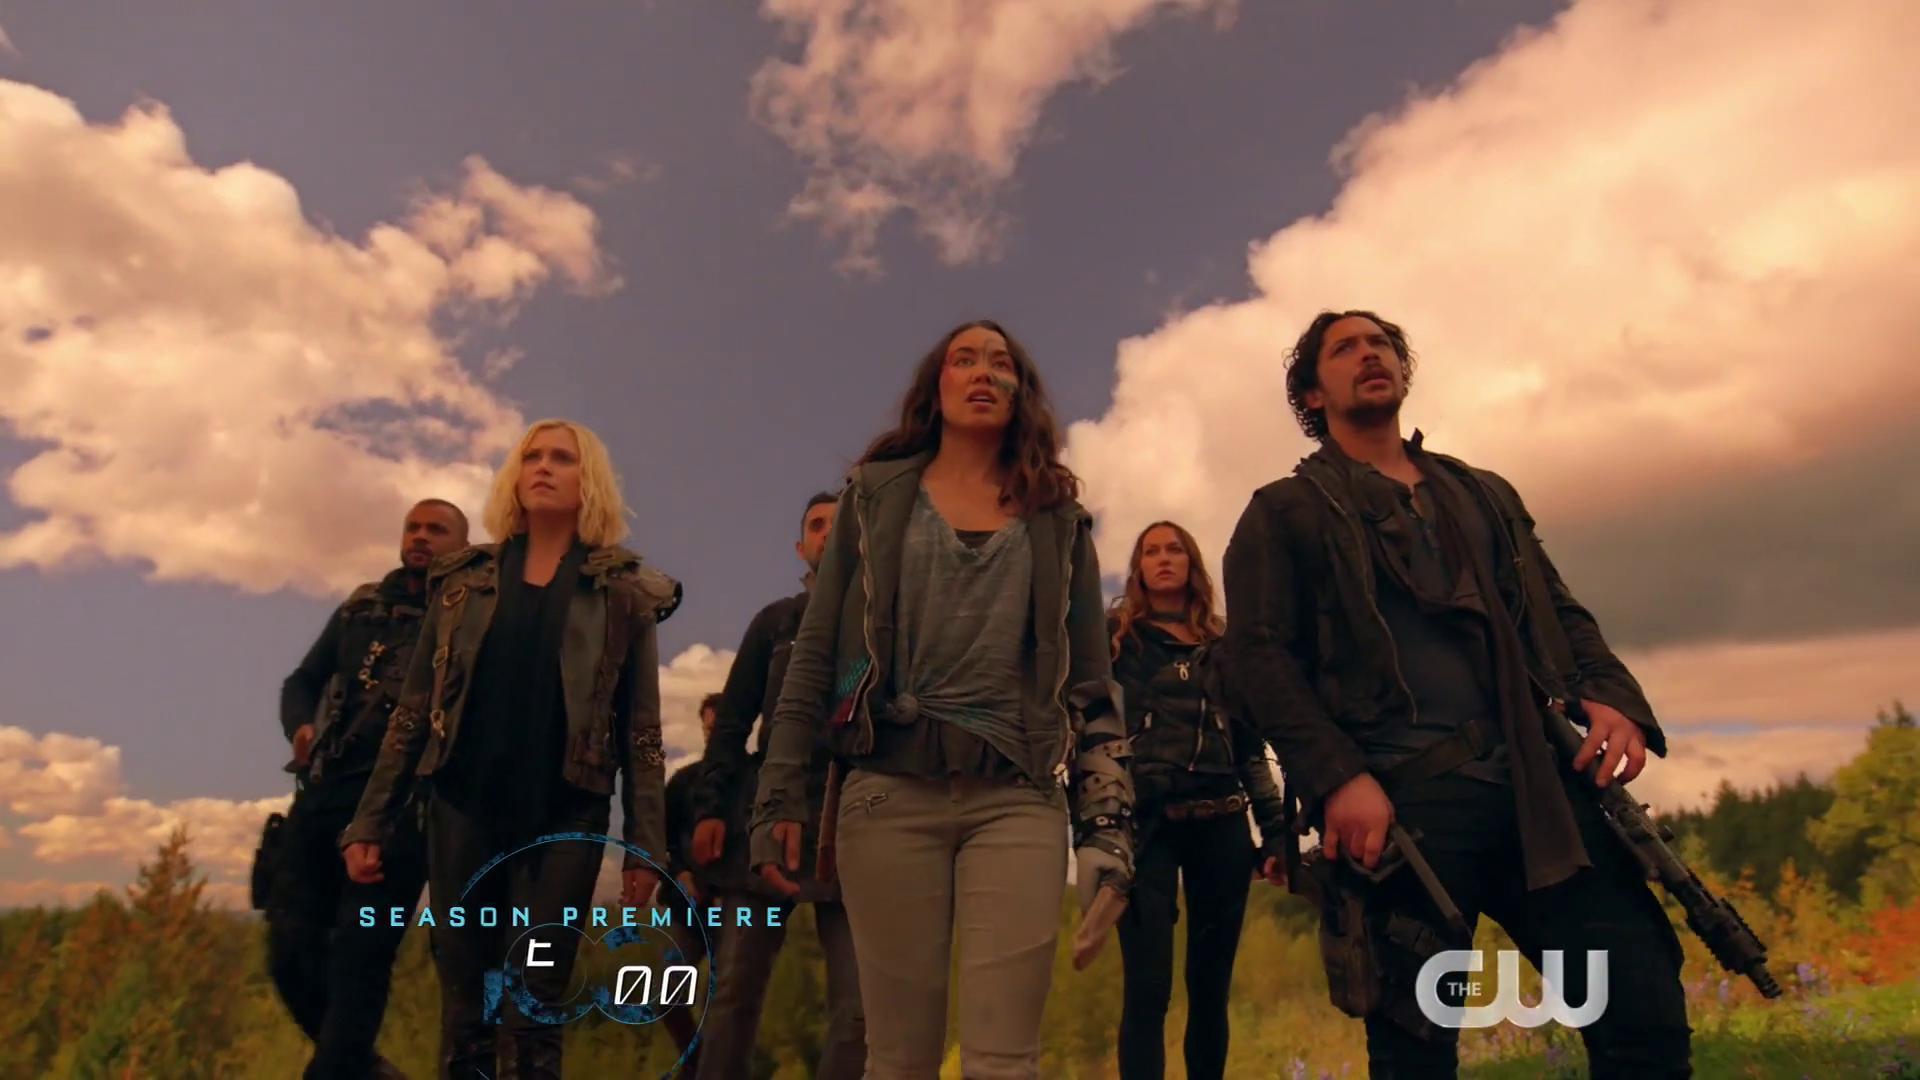 The Planet Of The Rising Suns: A Look Into The 100 Season 6